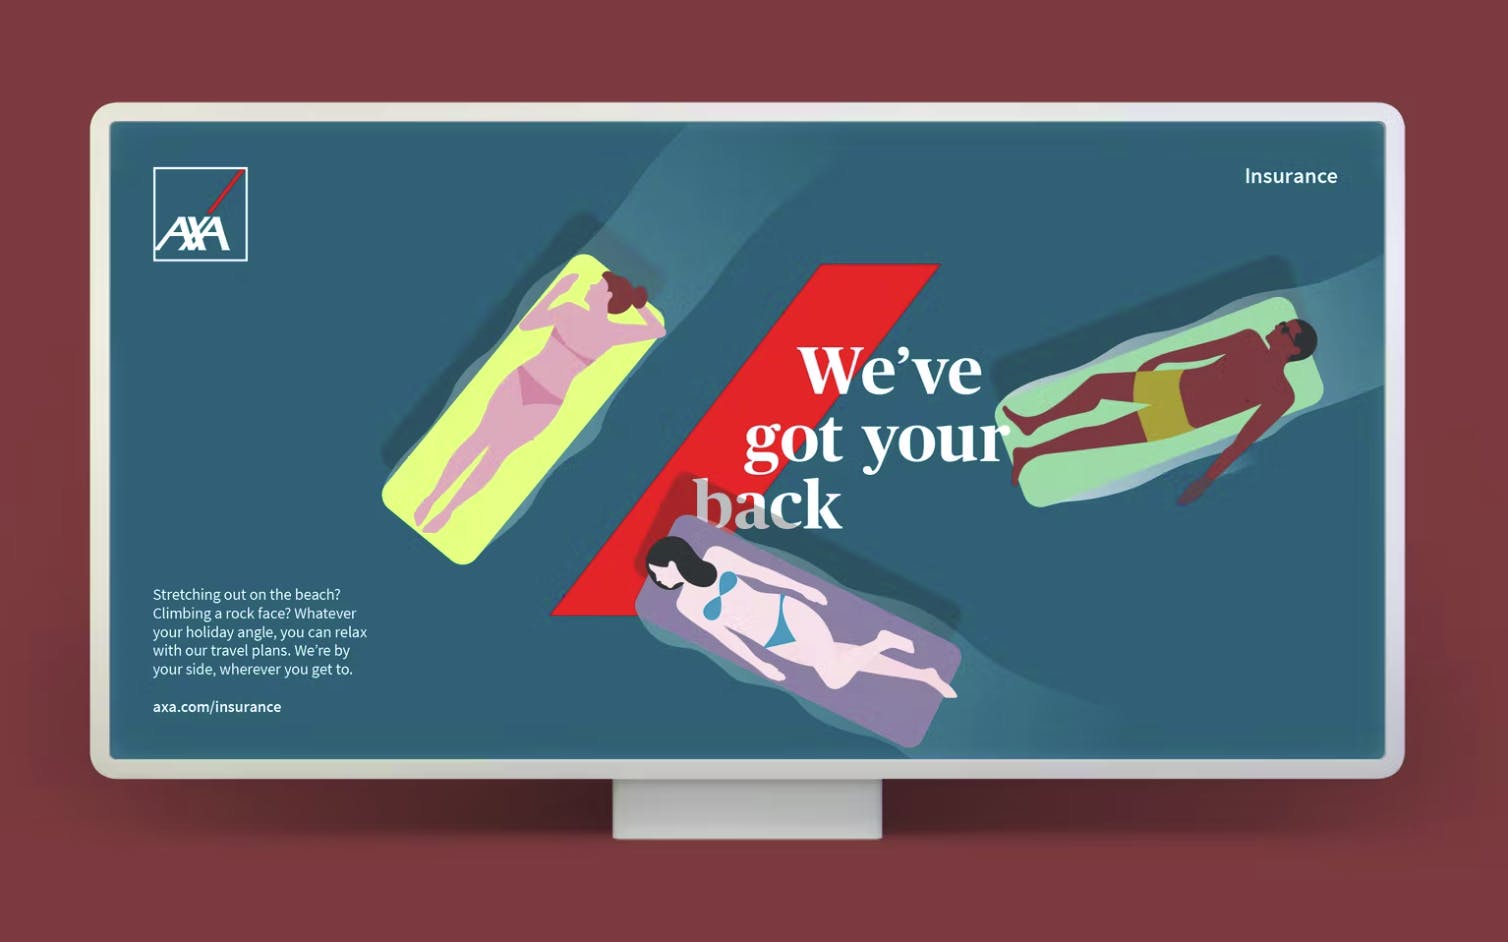 Wolff Olins for AXA